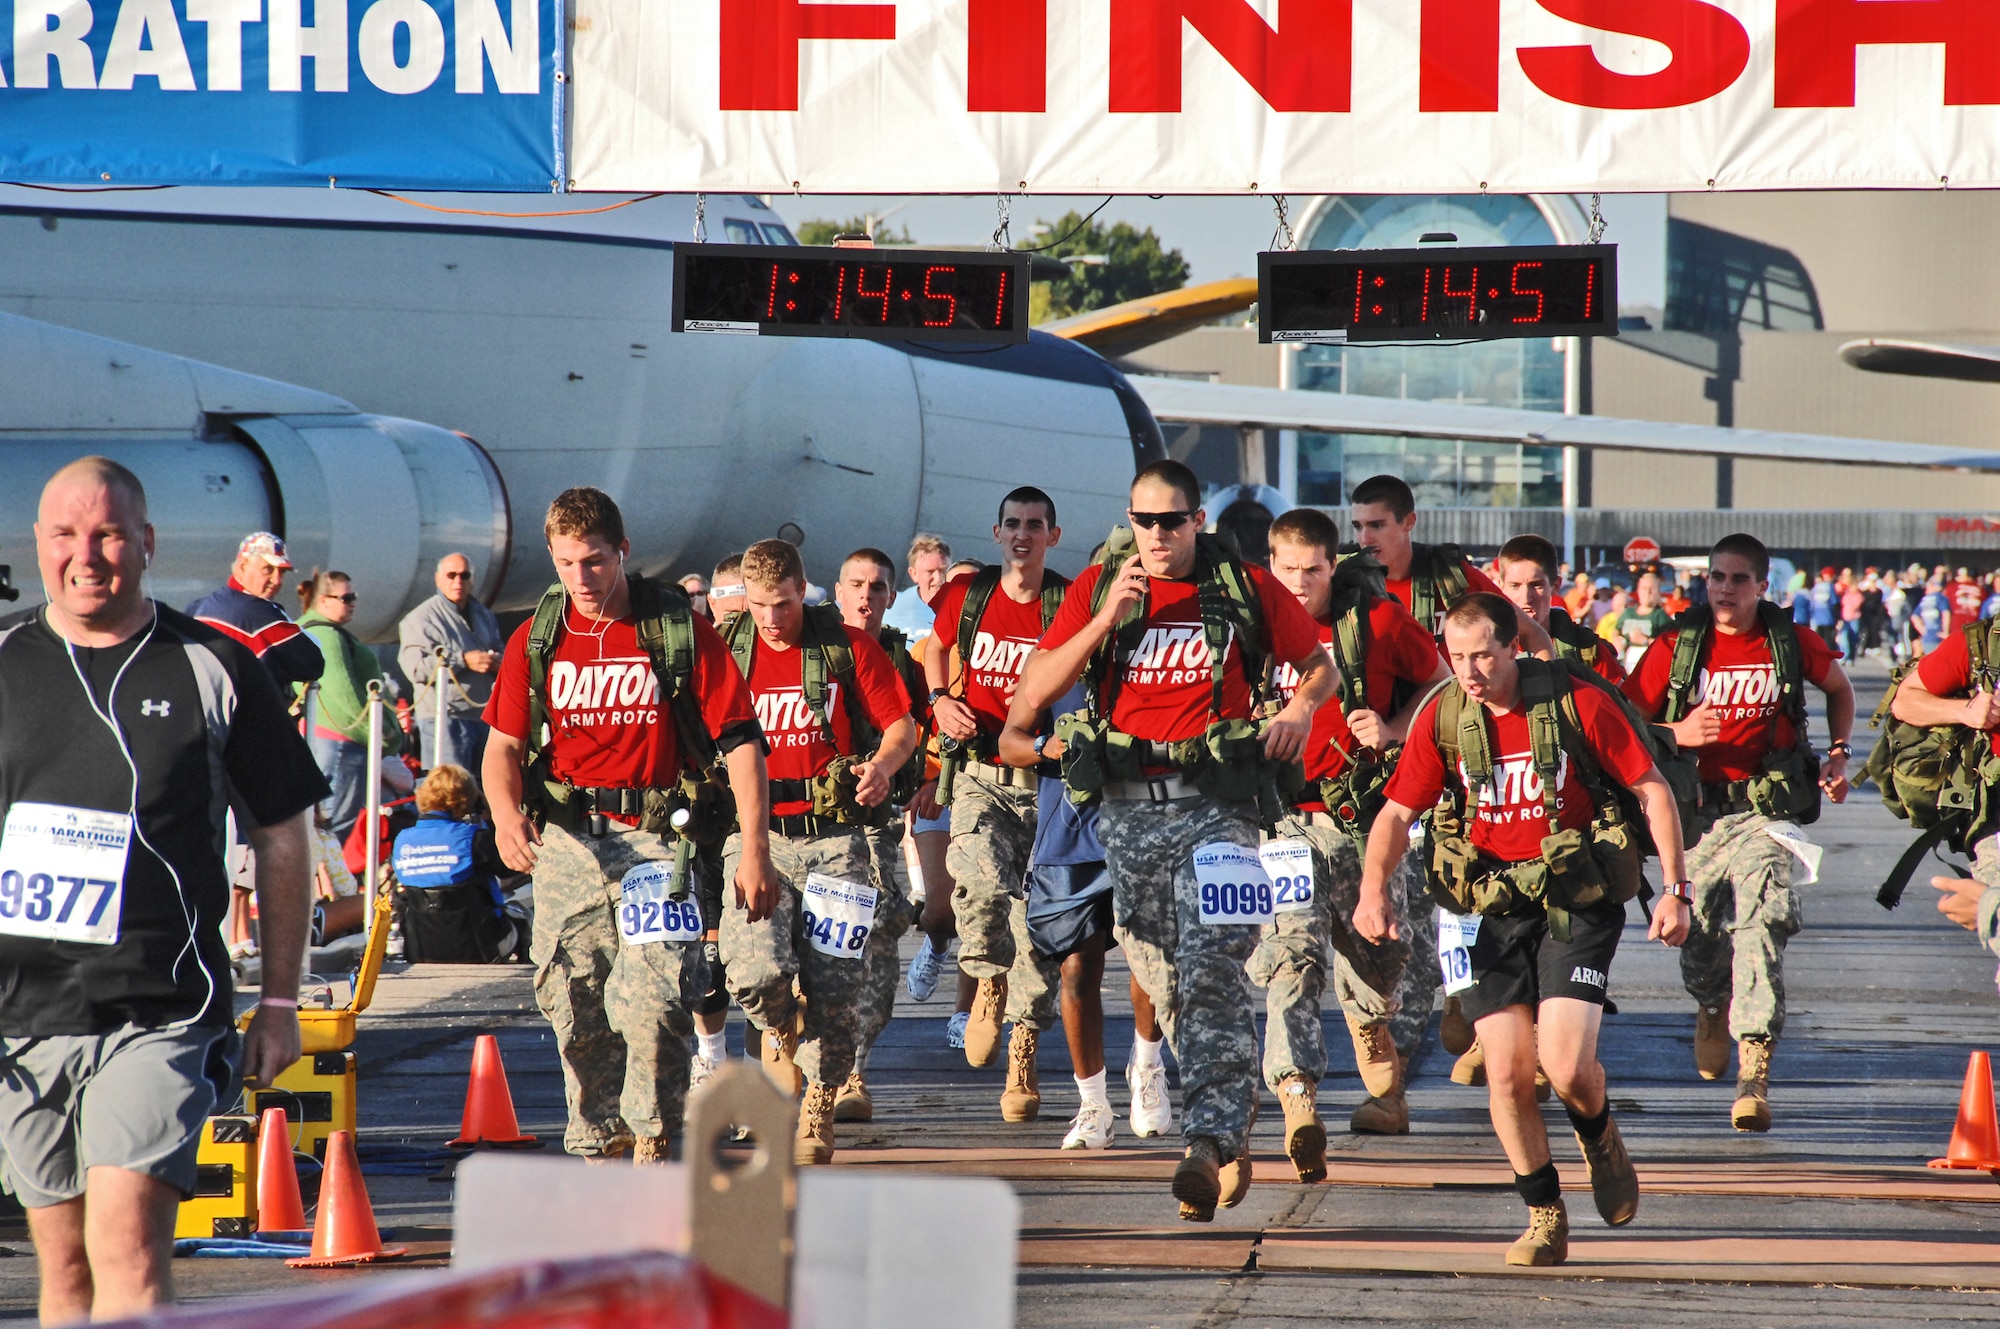 Army ROTC members from the University of Dayton ran the 10K race wearing boots and backpacks Sept. 19, 2009 during the U.S. Air Force Marathon at Wright-Patterson AIr Force Base, Ohio. A record 9,969 runners participated in events which included a 5K, 10K, half marathon and marathon.  (Air Force photo/Ben Strasser)